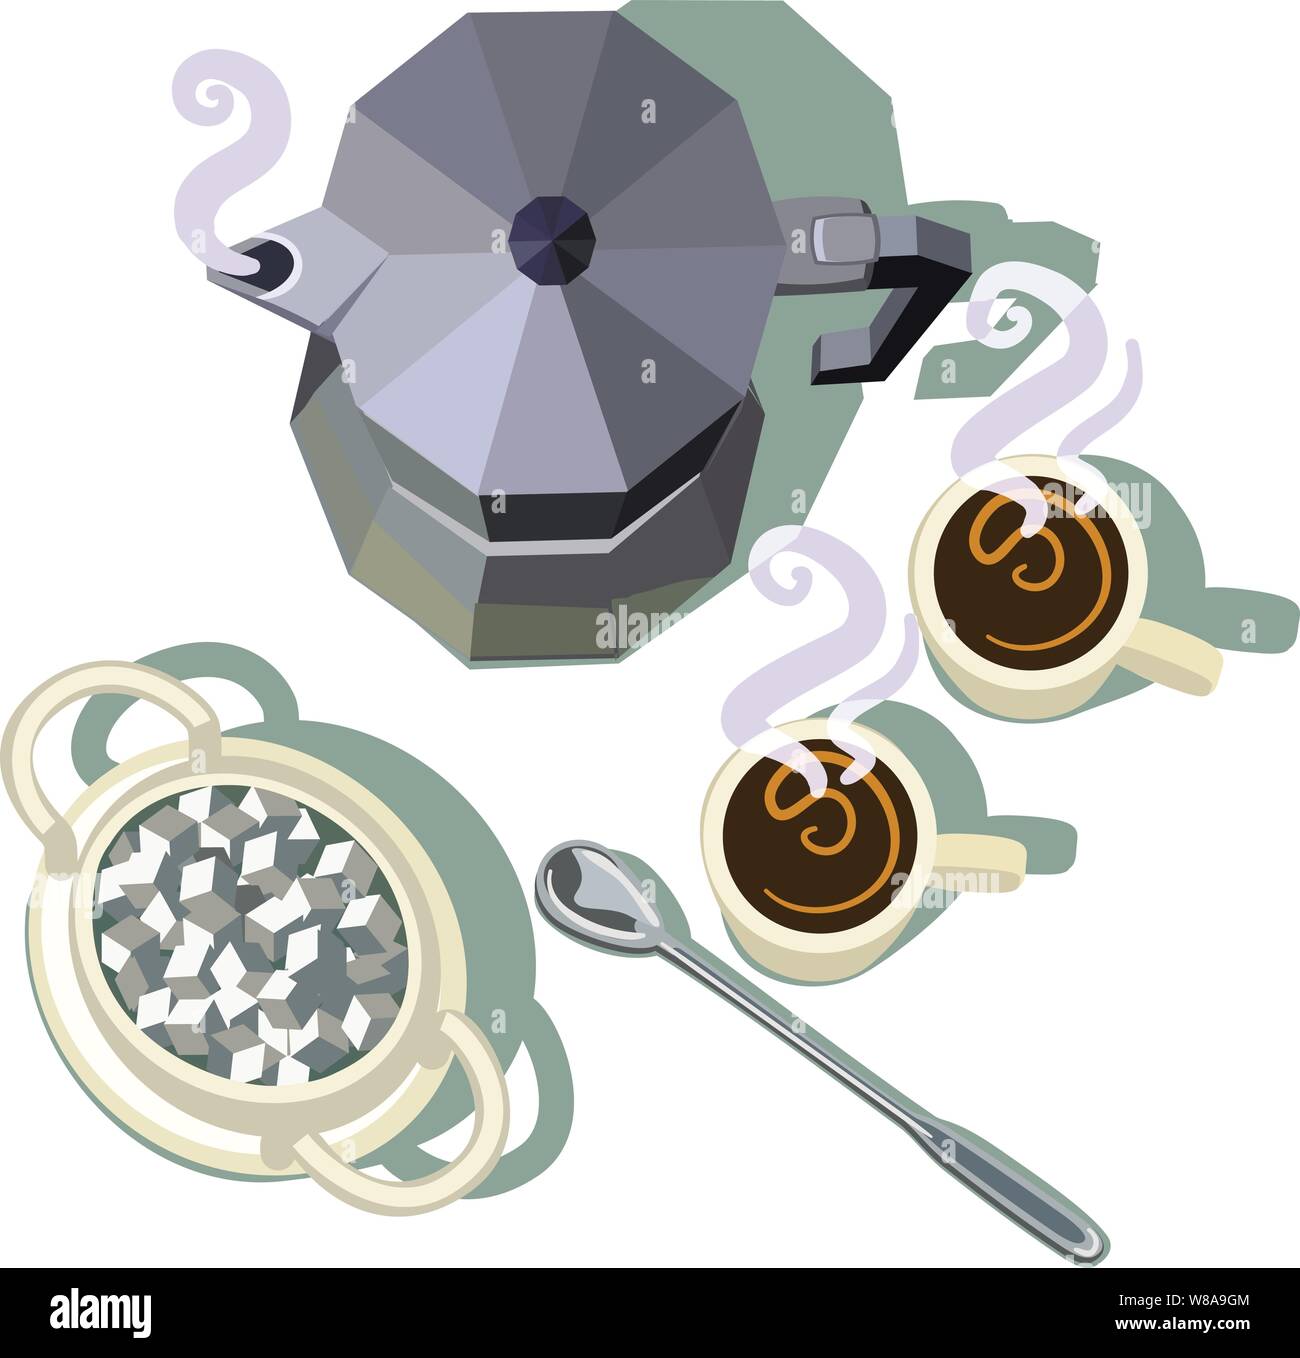 Espresso coffee brewer with 2 steaming cups of coffee a spoon & a large sugar bowl fulll of cubed sugar Stock Vector